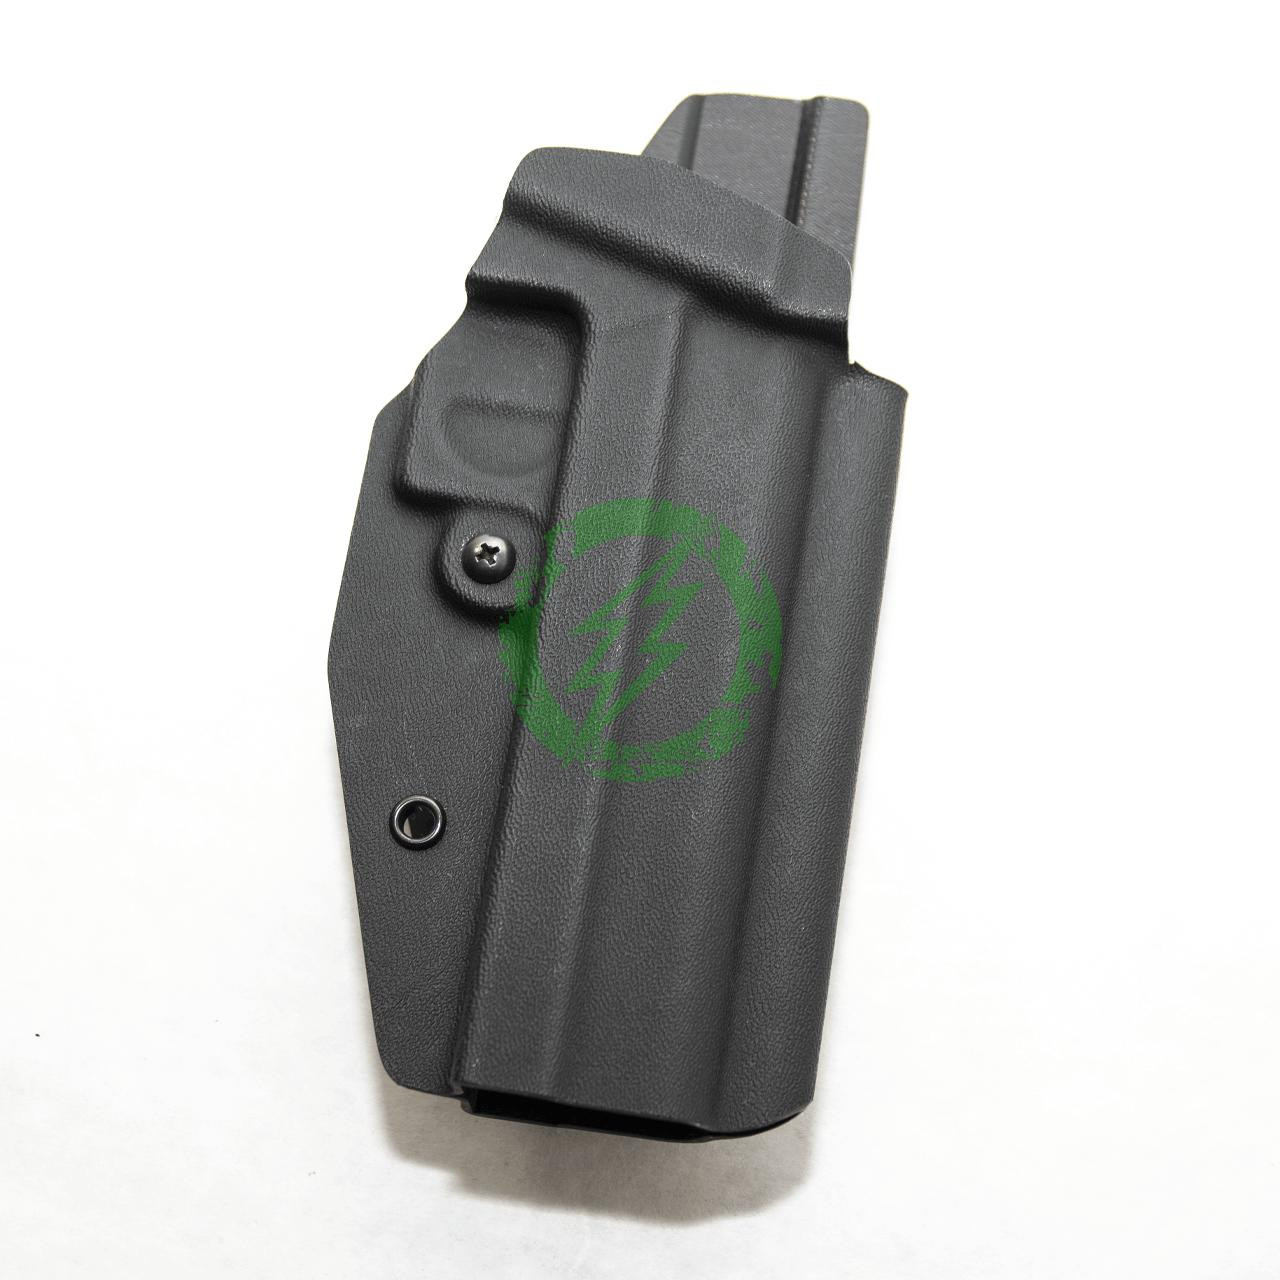  MC Kydex Black Elite Series Holster for Airsoft HiCapa 